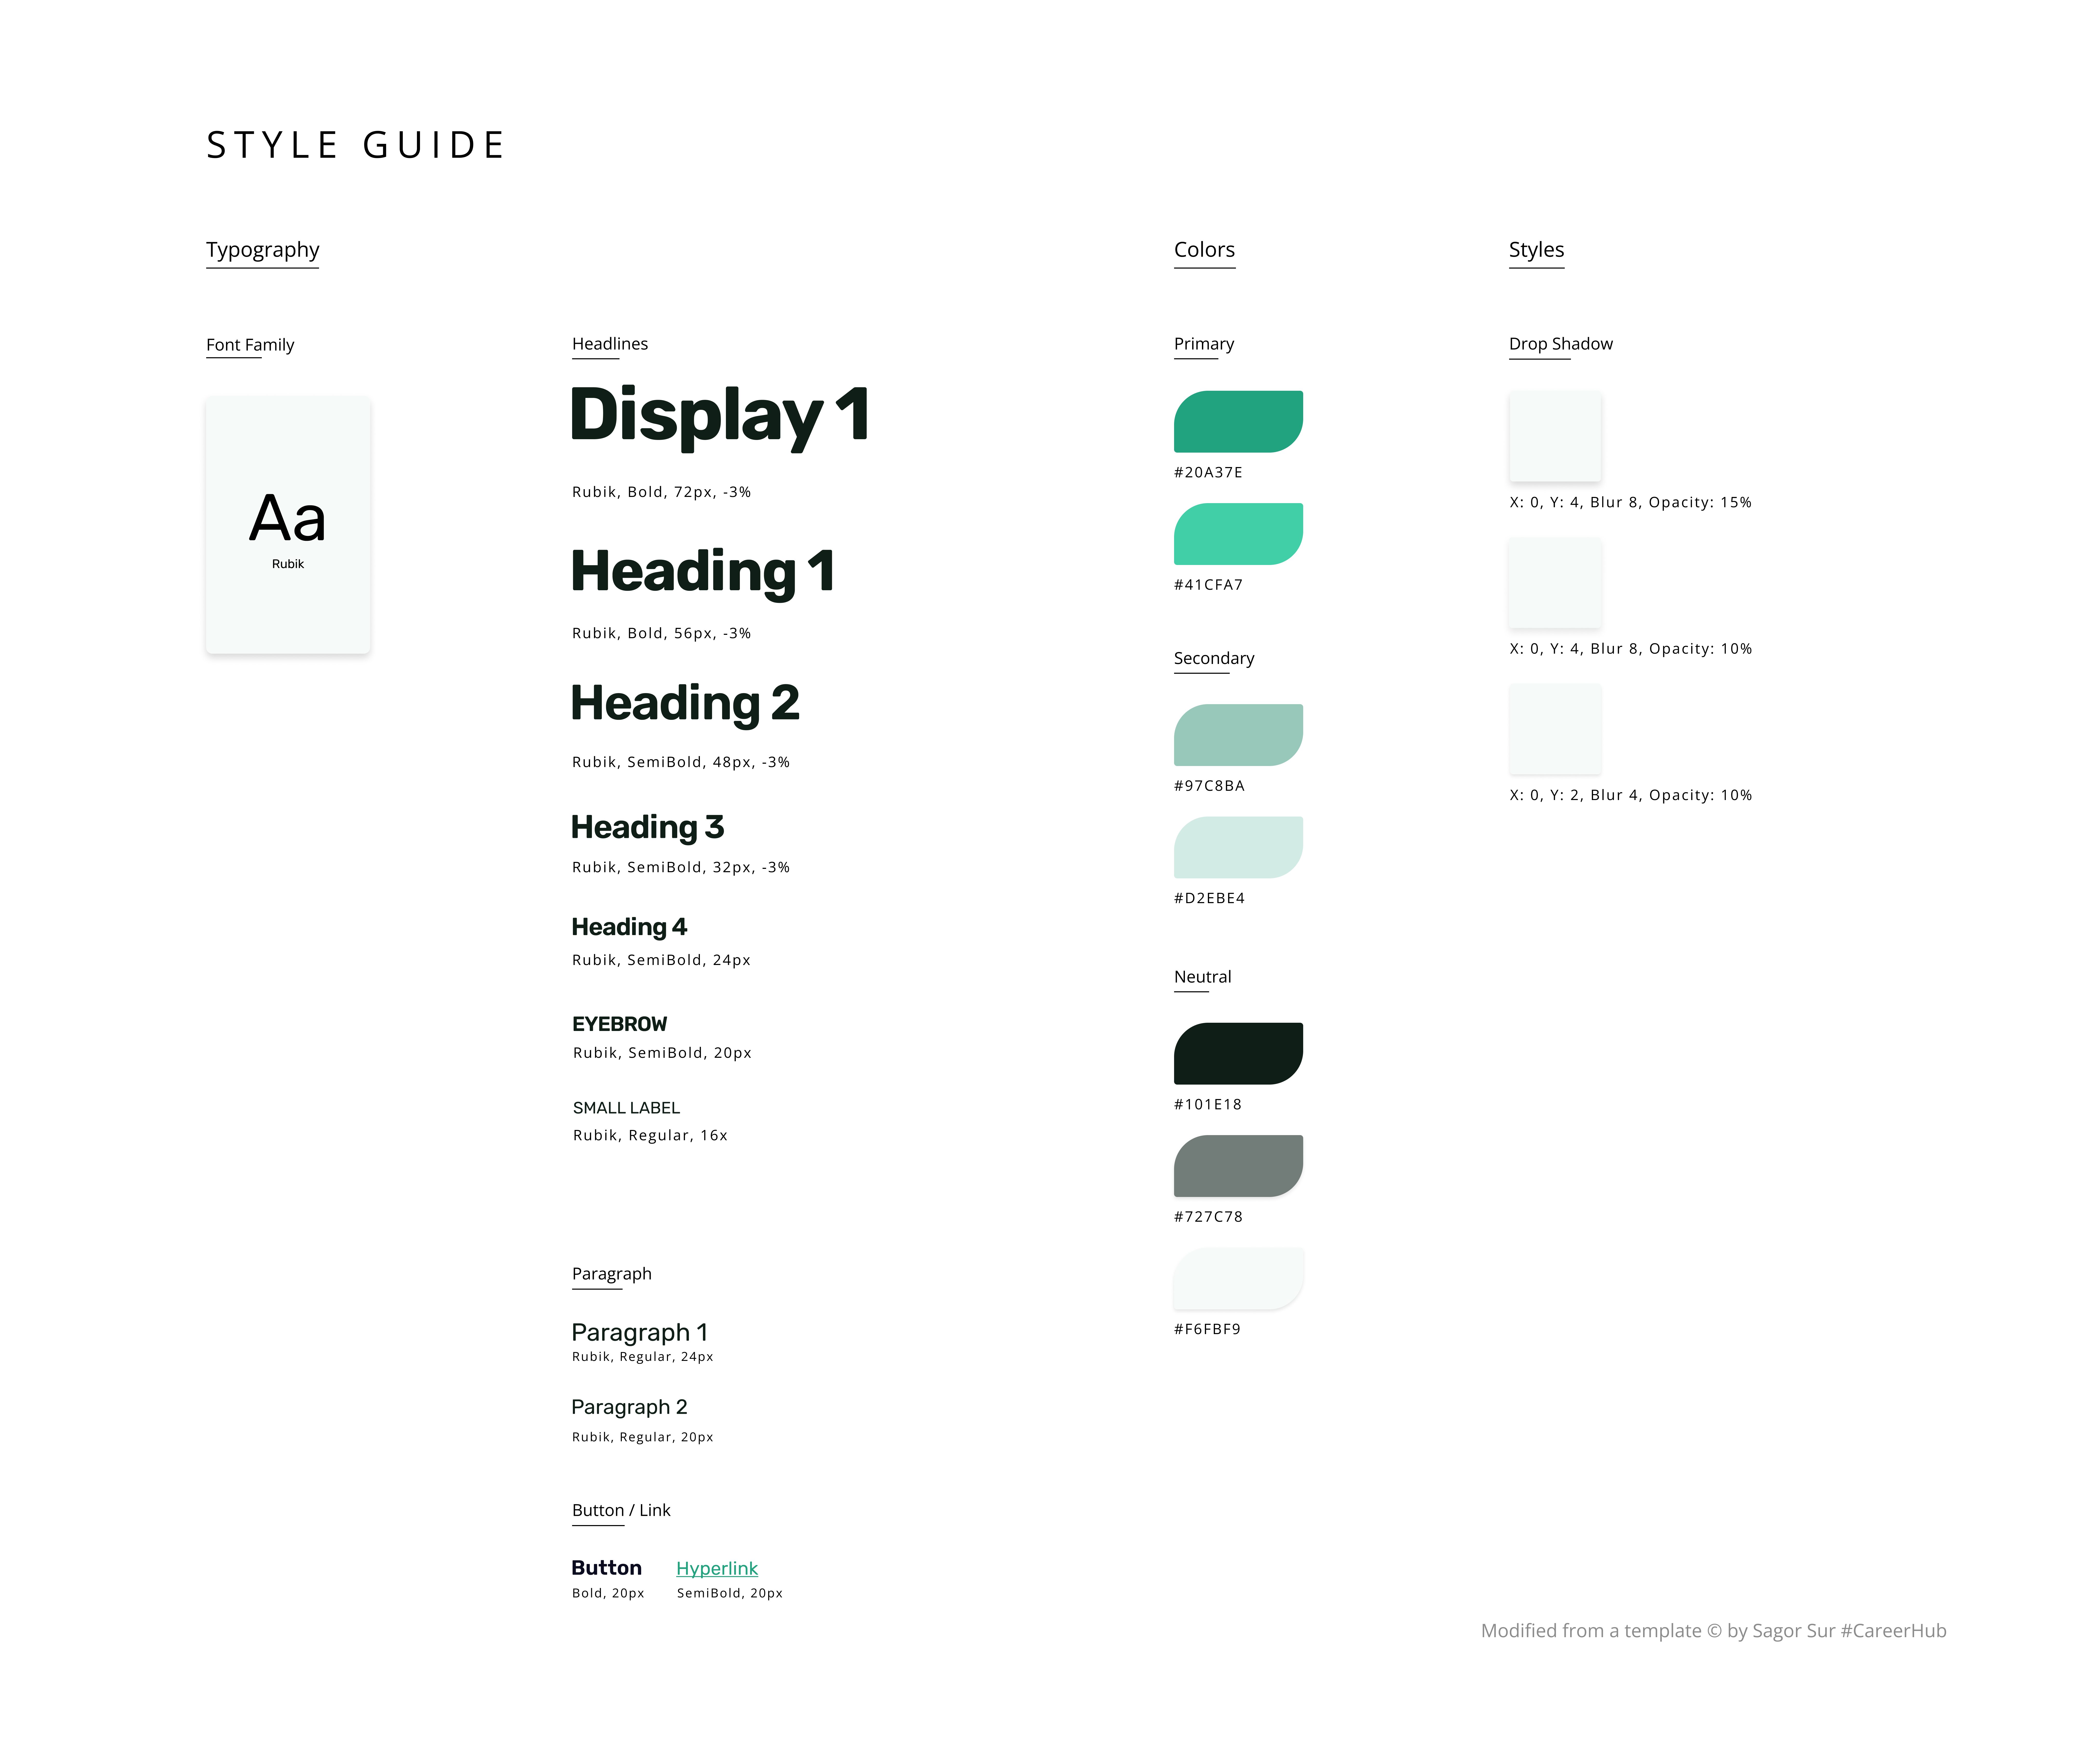 A style guide documenting the typefaces and colors to be used in the UI design.